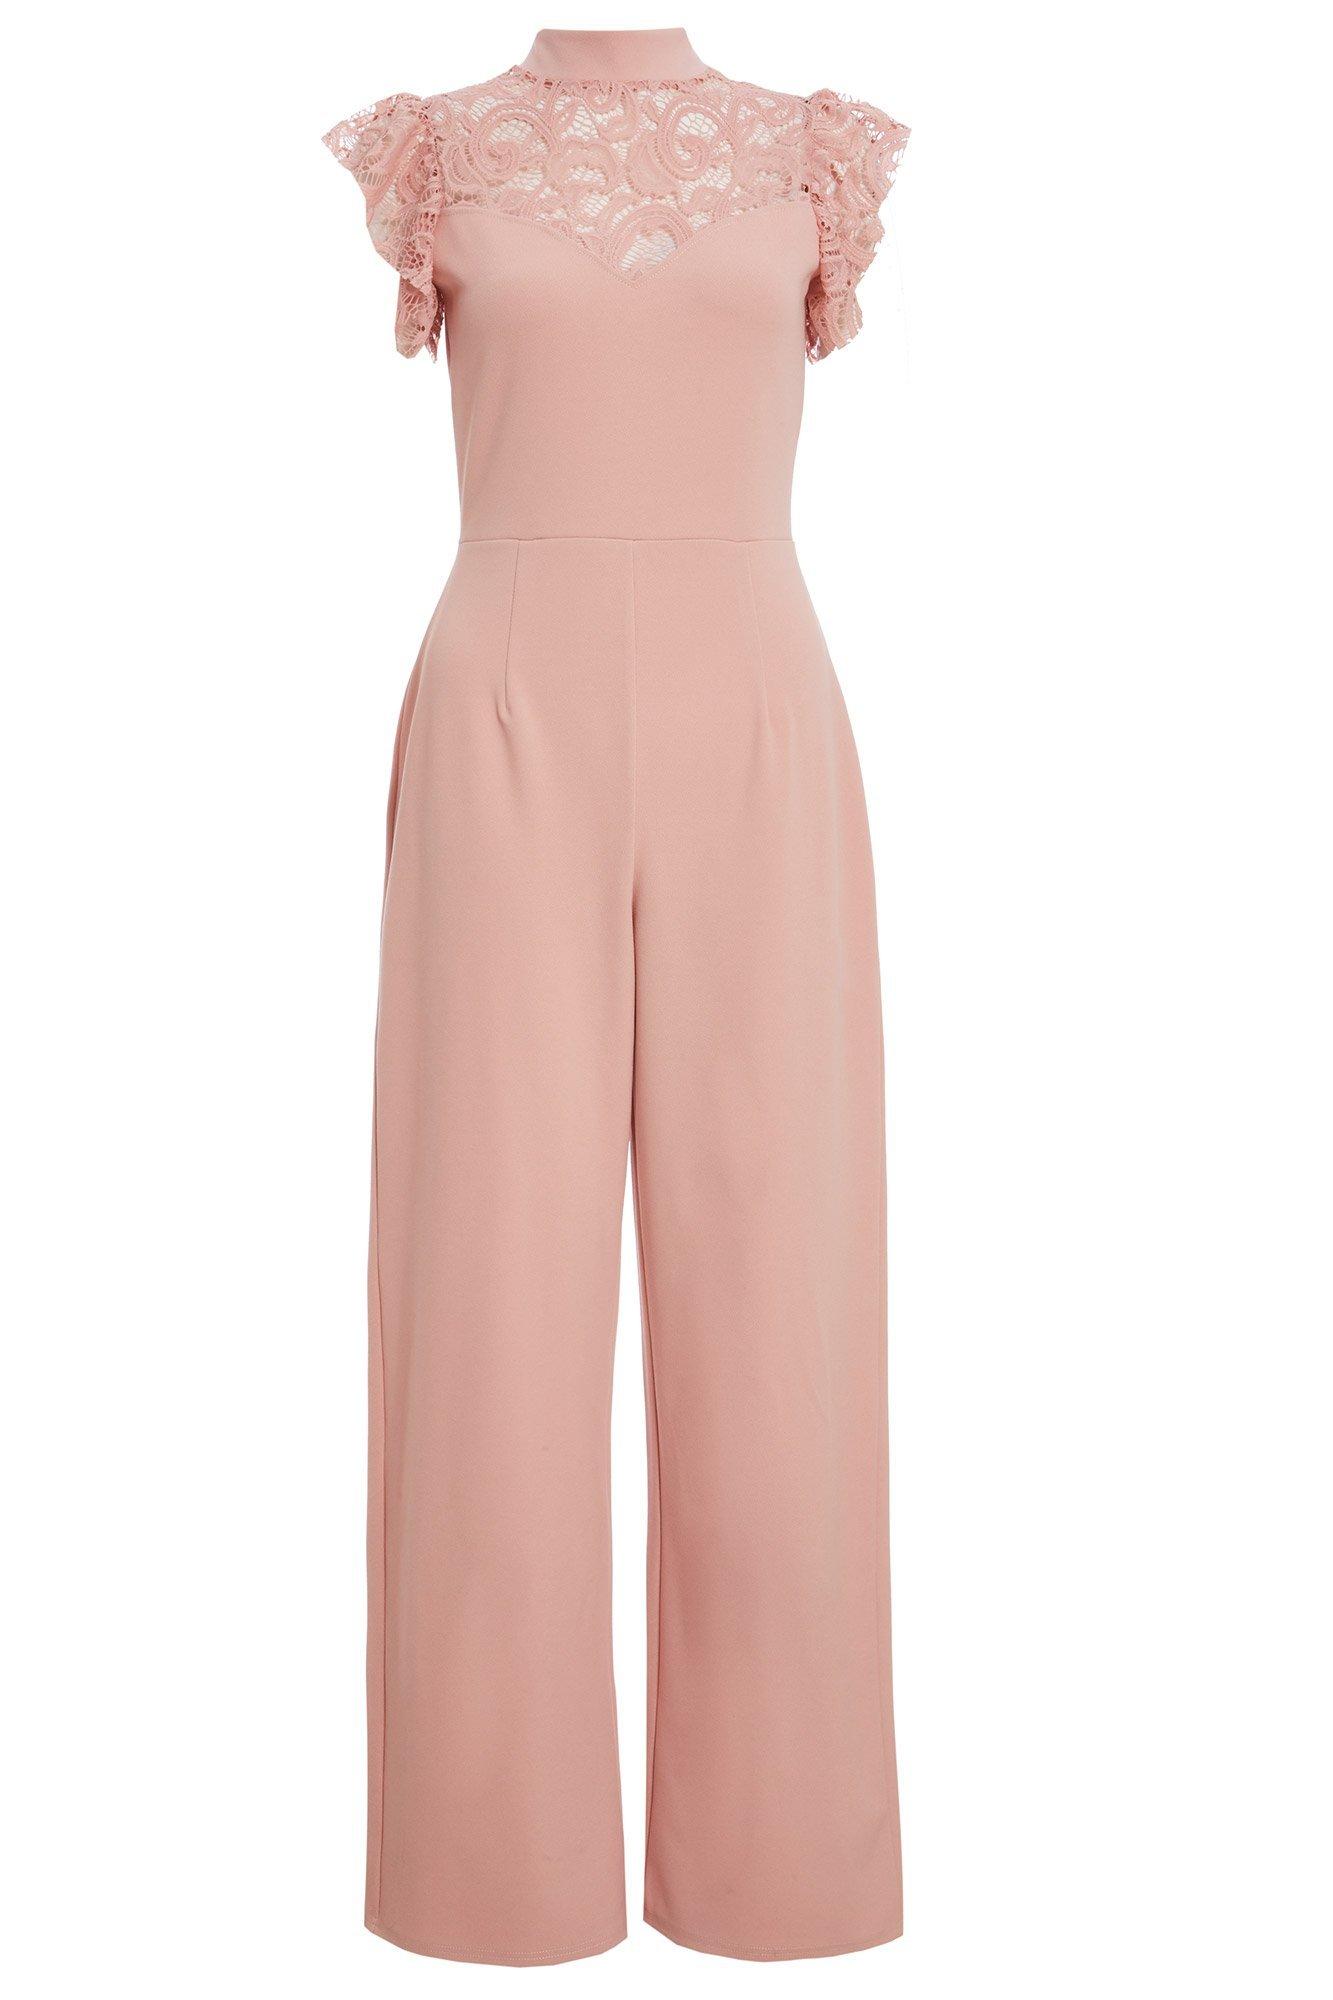 Dusky Pink Lace Frill High Neck Palazzo Jumpsuit - Quiz Clothing